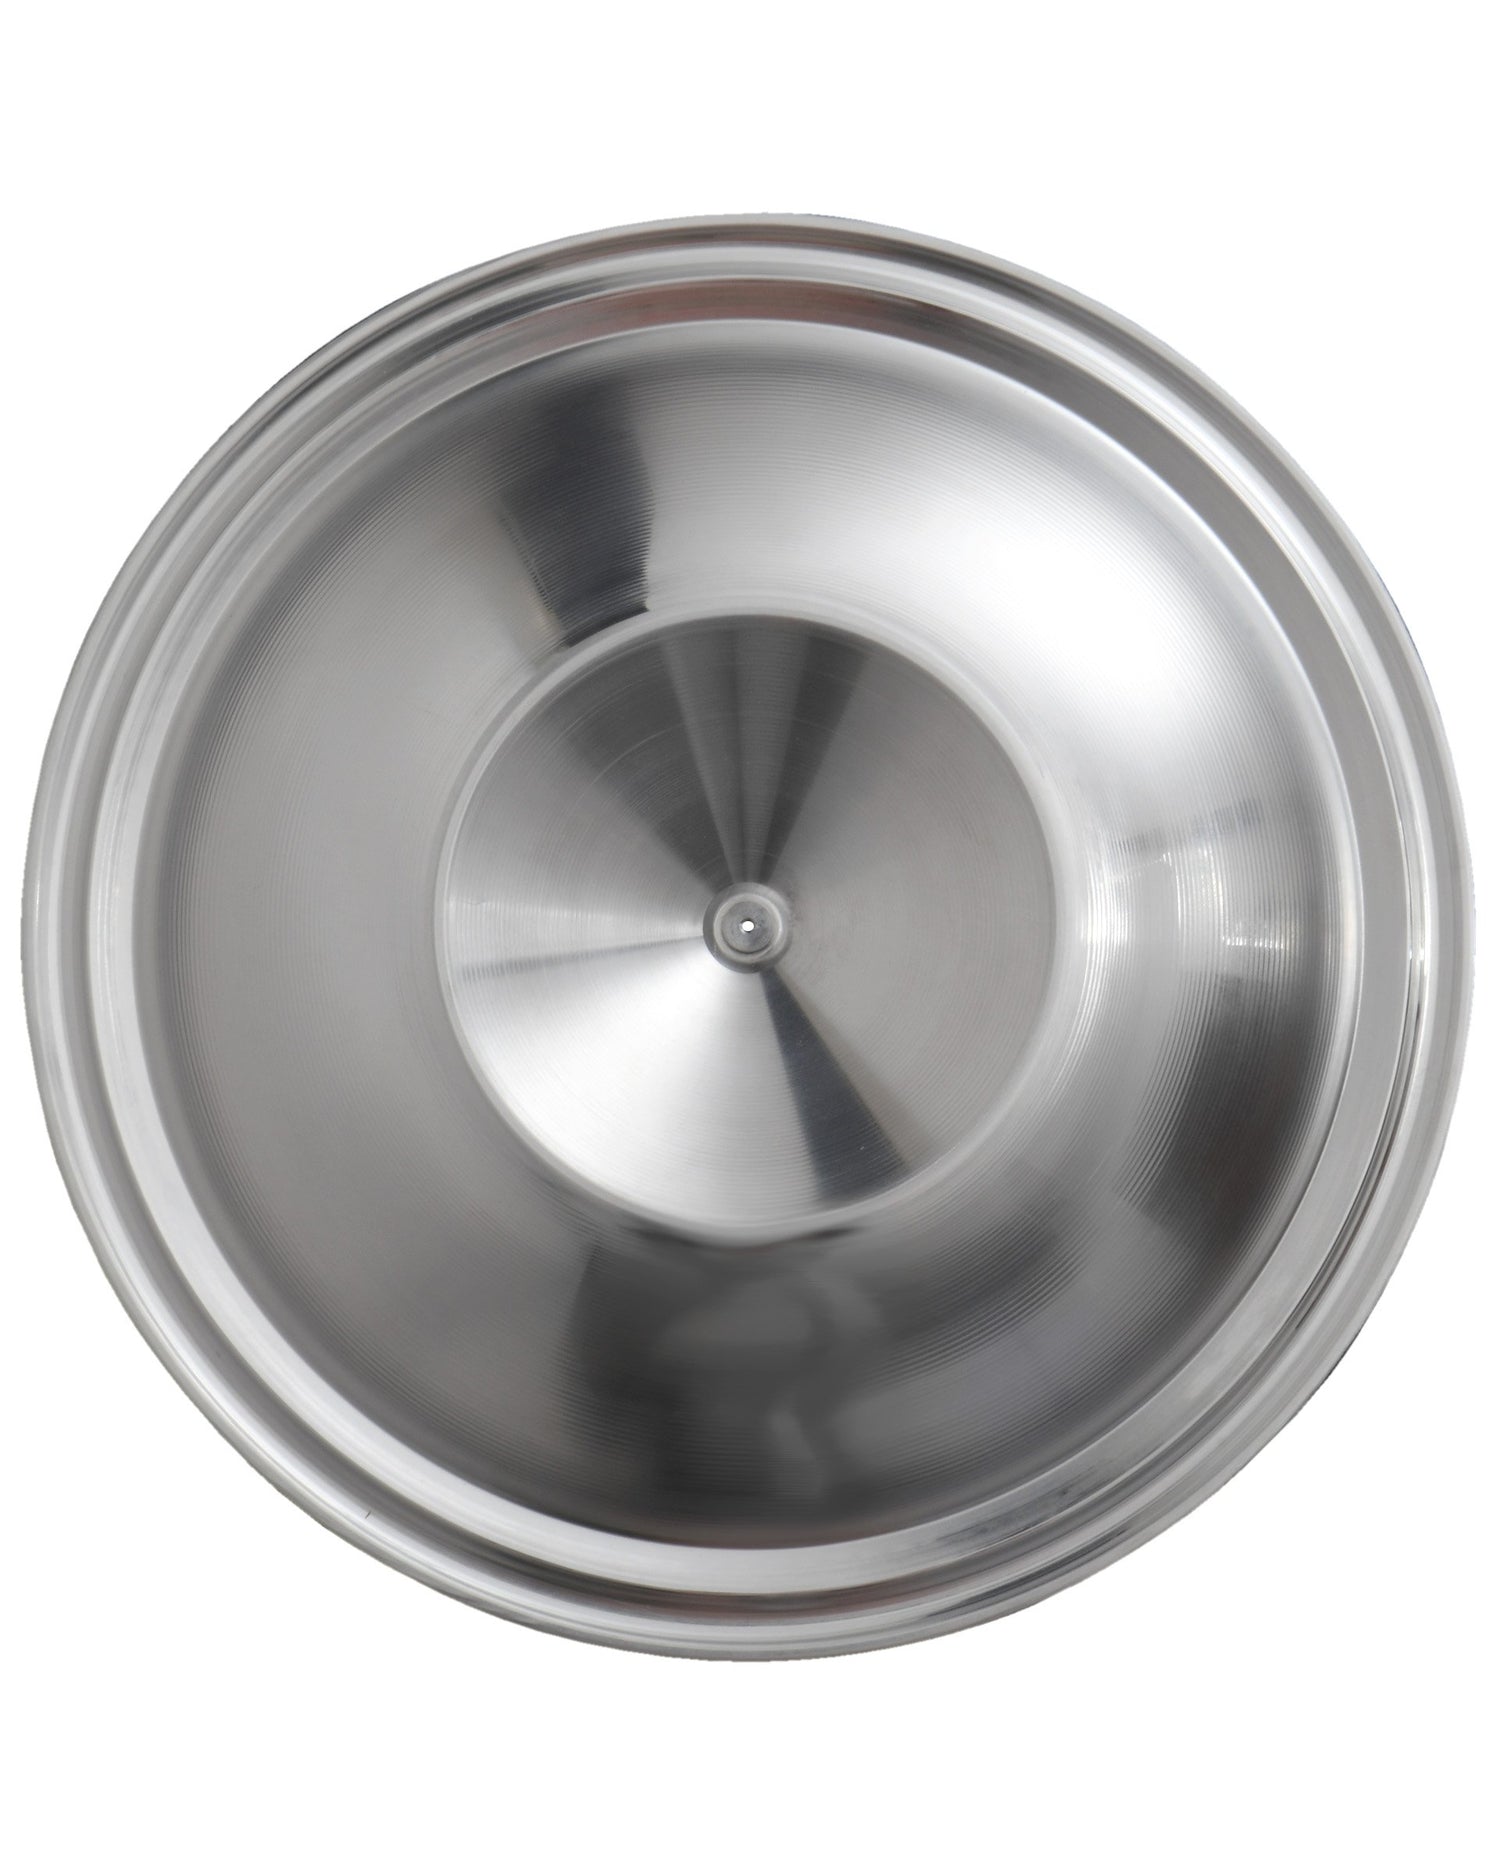 Image 1 of Continental Resonator Cone - SKU# CRC1 : Product Type Accessories & Parts : Elderly Instruments